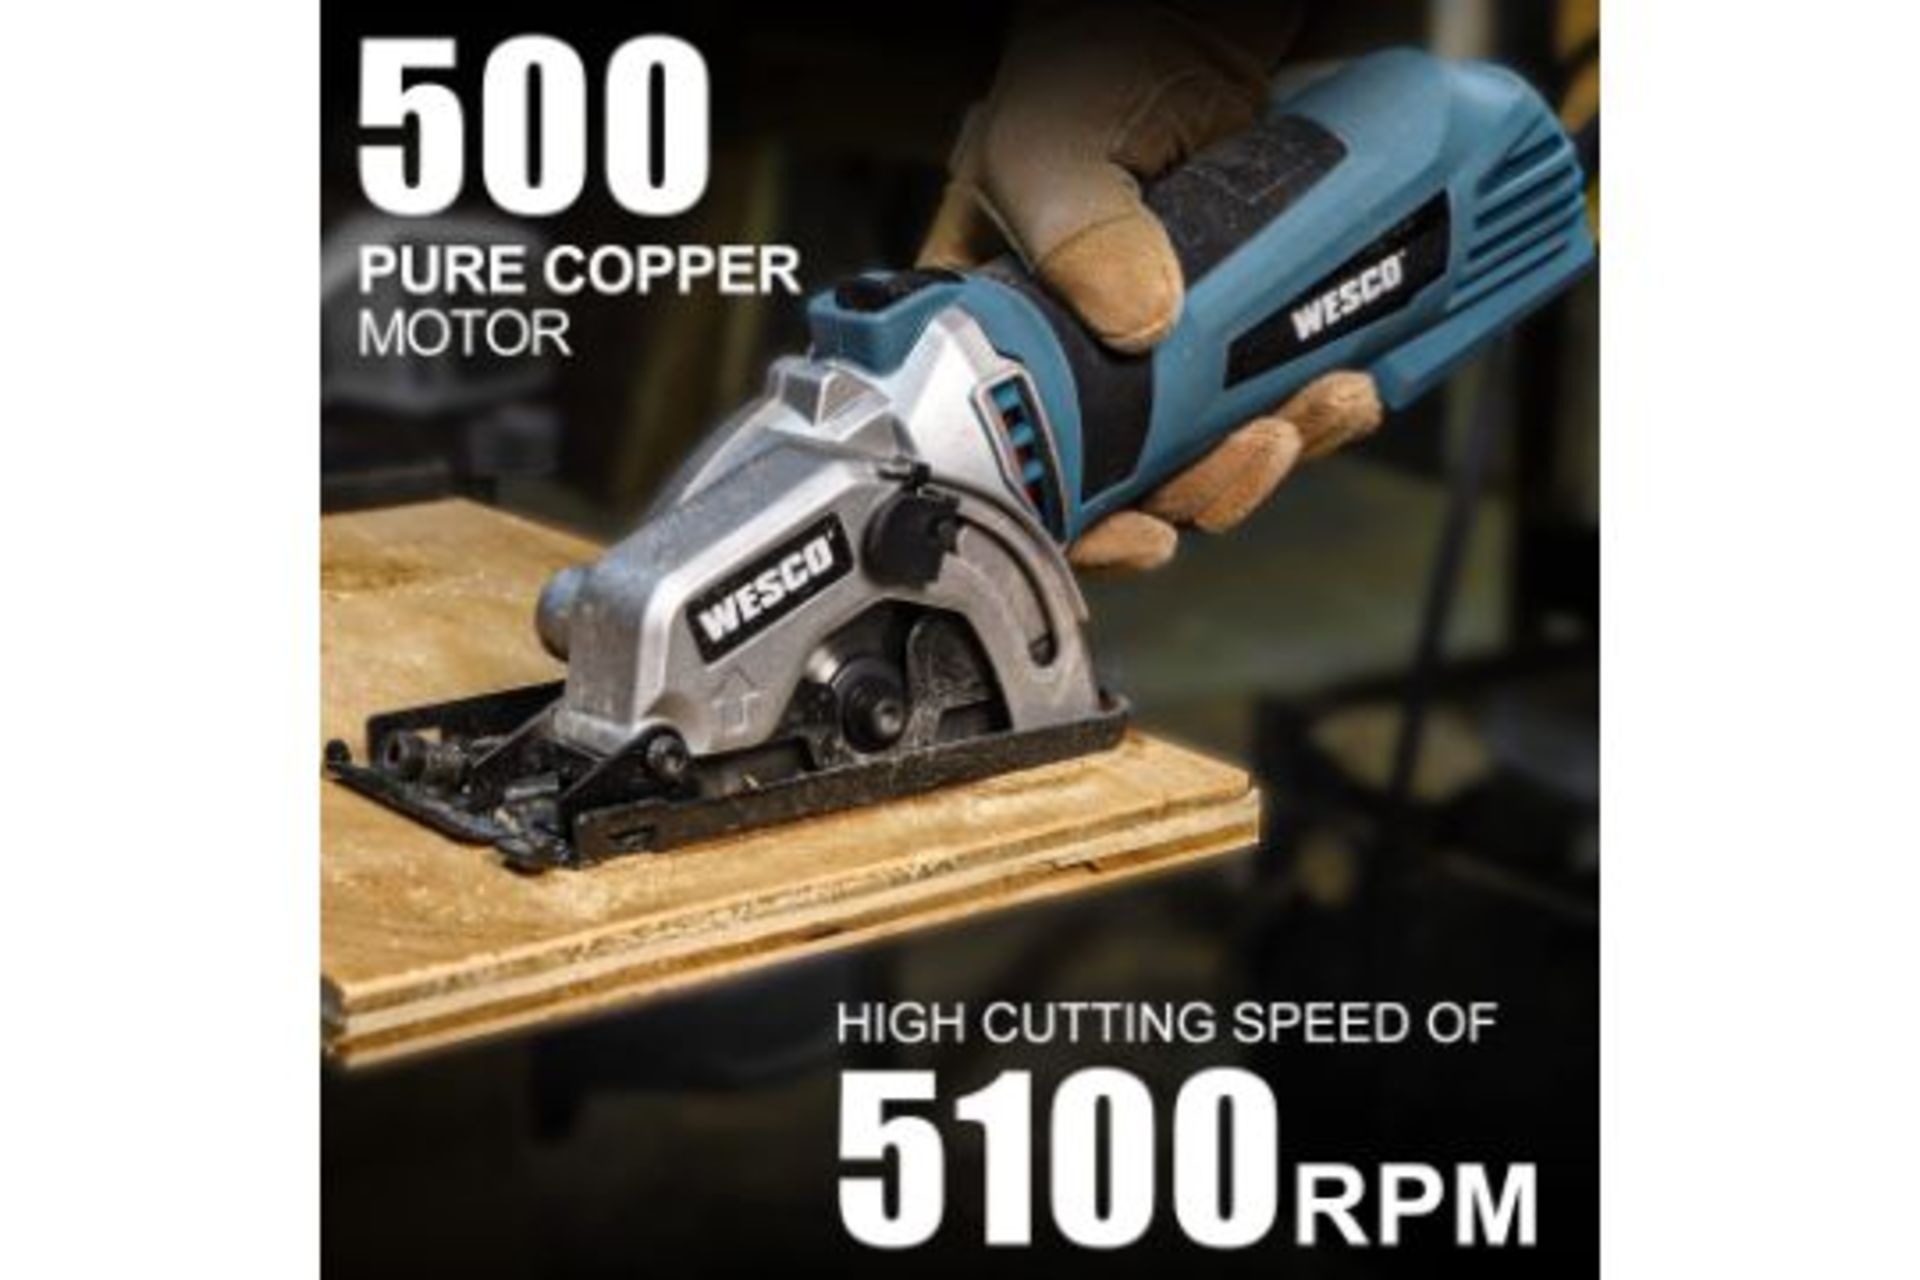 TRADE LOT 5 X NEW BOXED WESCO 500W 5100 RPM Compact Circular Saw with 2 Saw Blades Cutting Depth - Image 2 of 2